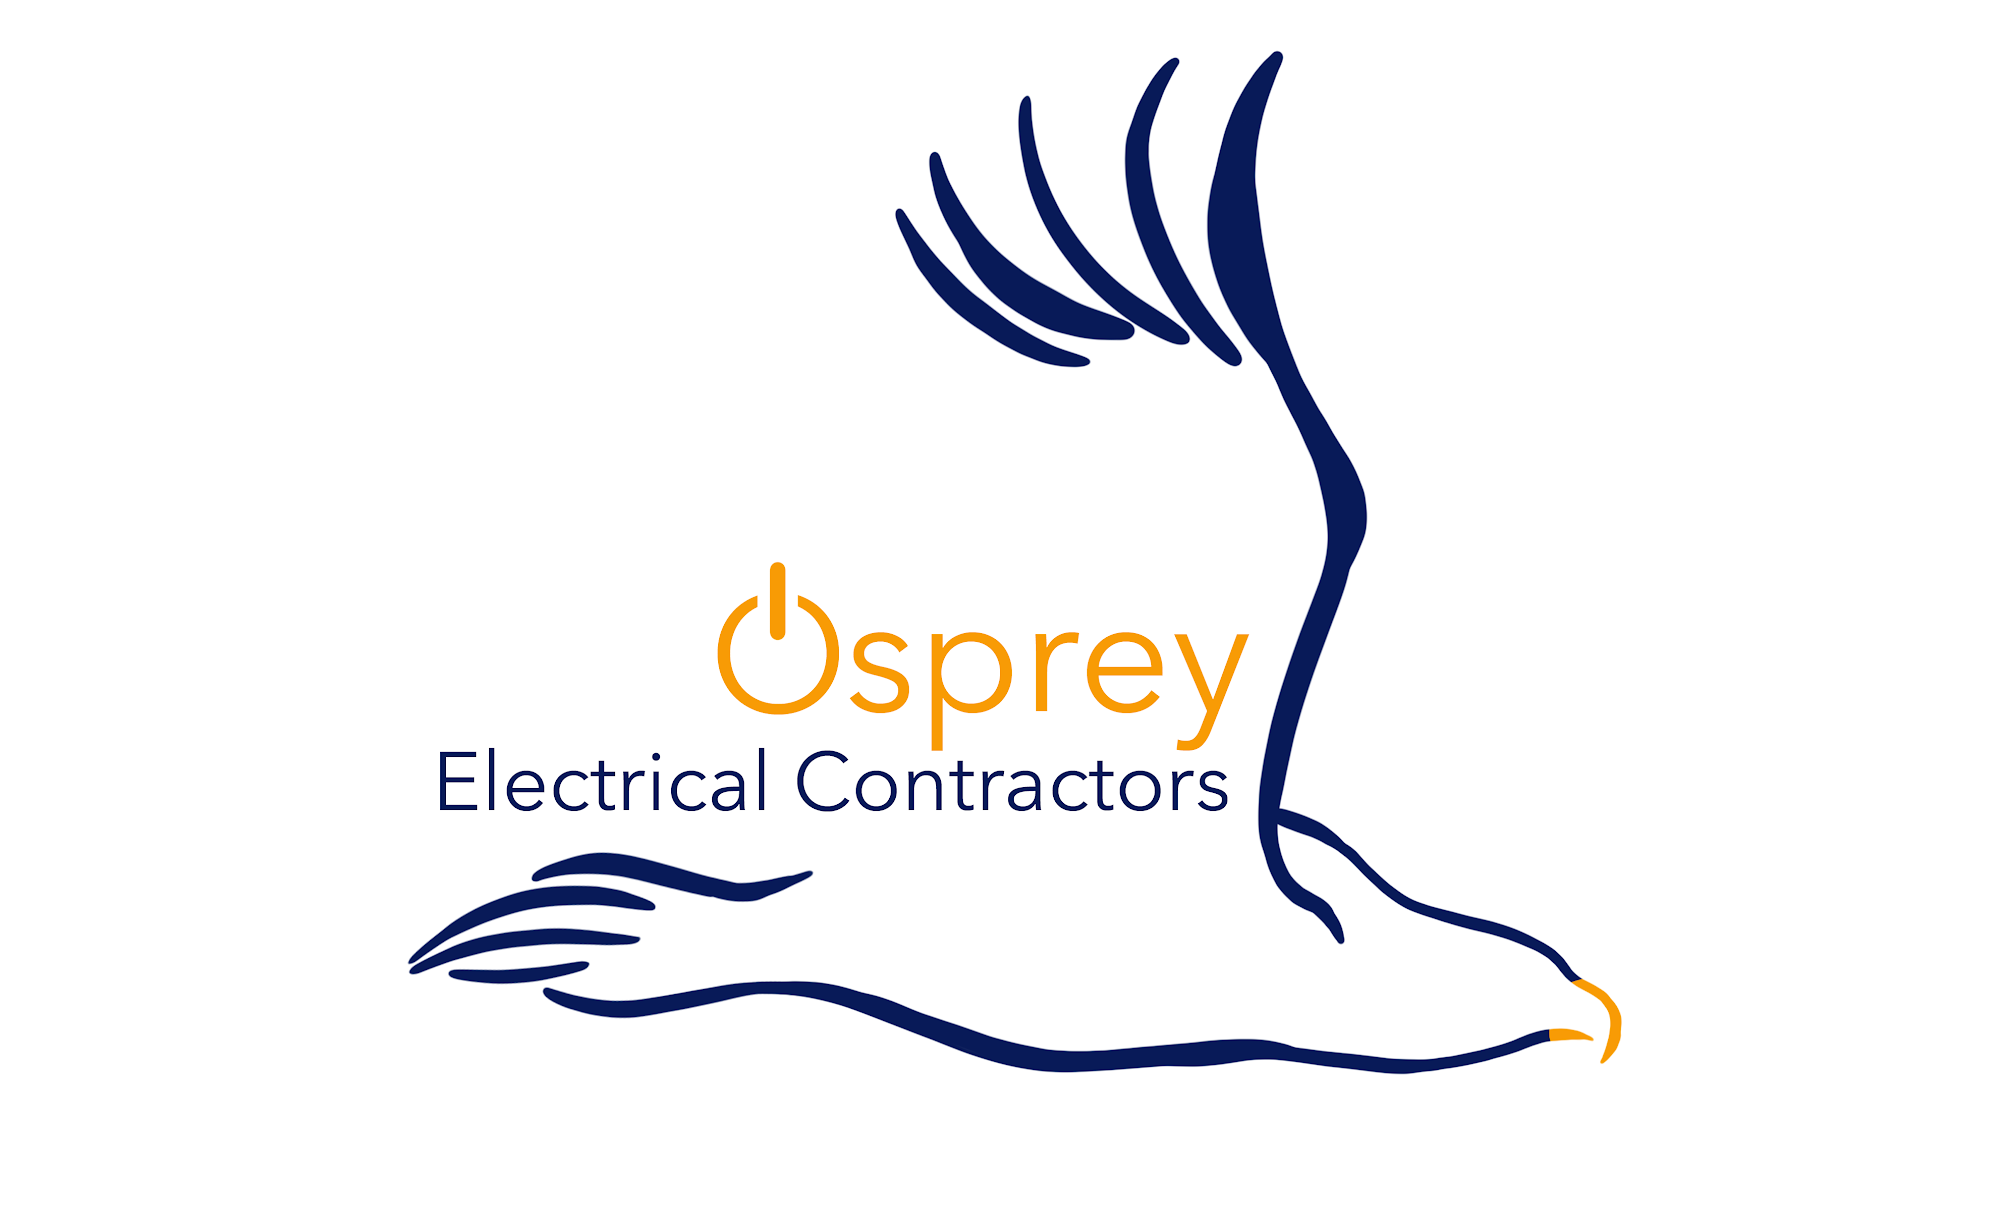 Osprey Electrical Contractors